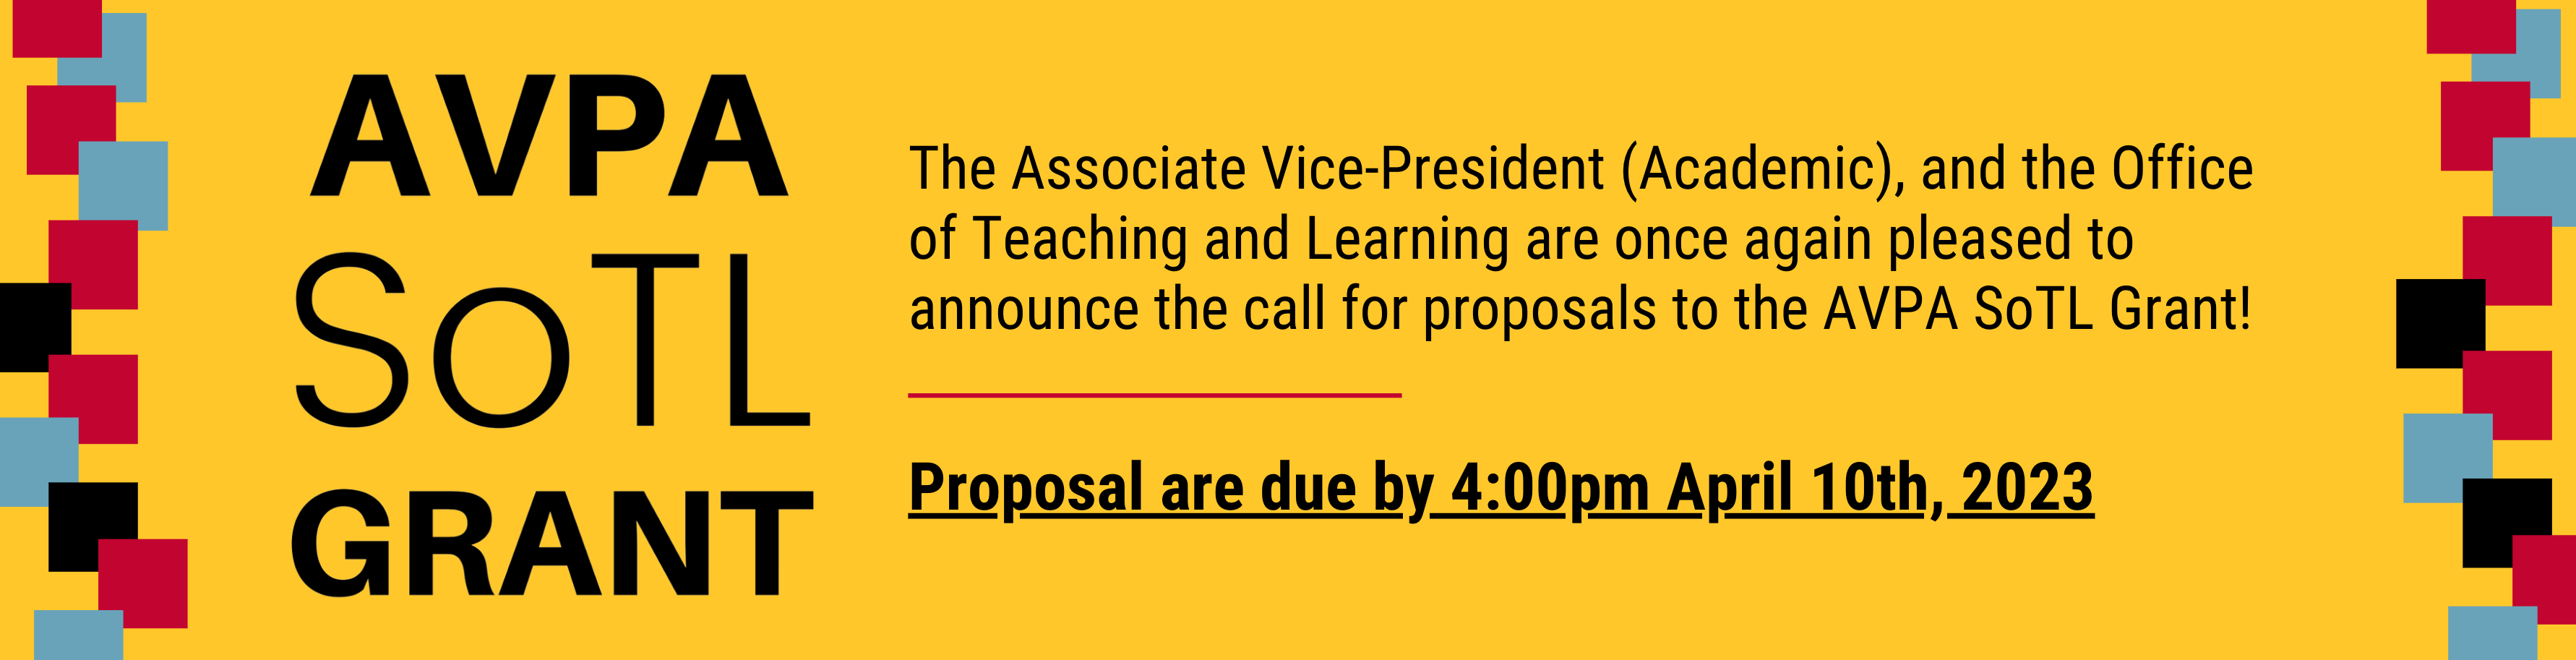 The Associate Vice-President (Academic), and the Office of Teaching and Learning are once again pleased to announce the call for proposals to the AVPA SoTL Grant! Proposal are due by 4:00pm March 24th, 2023